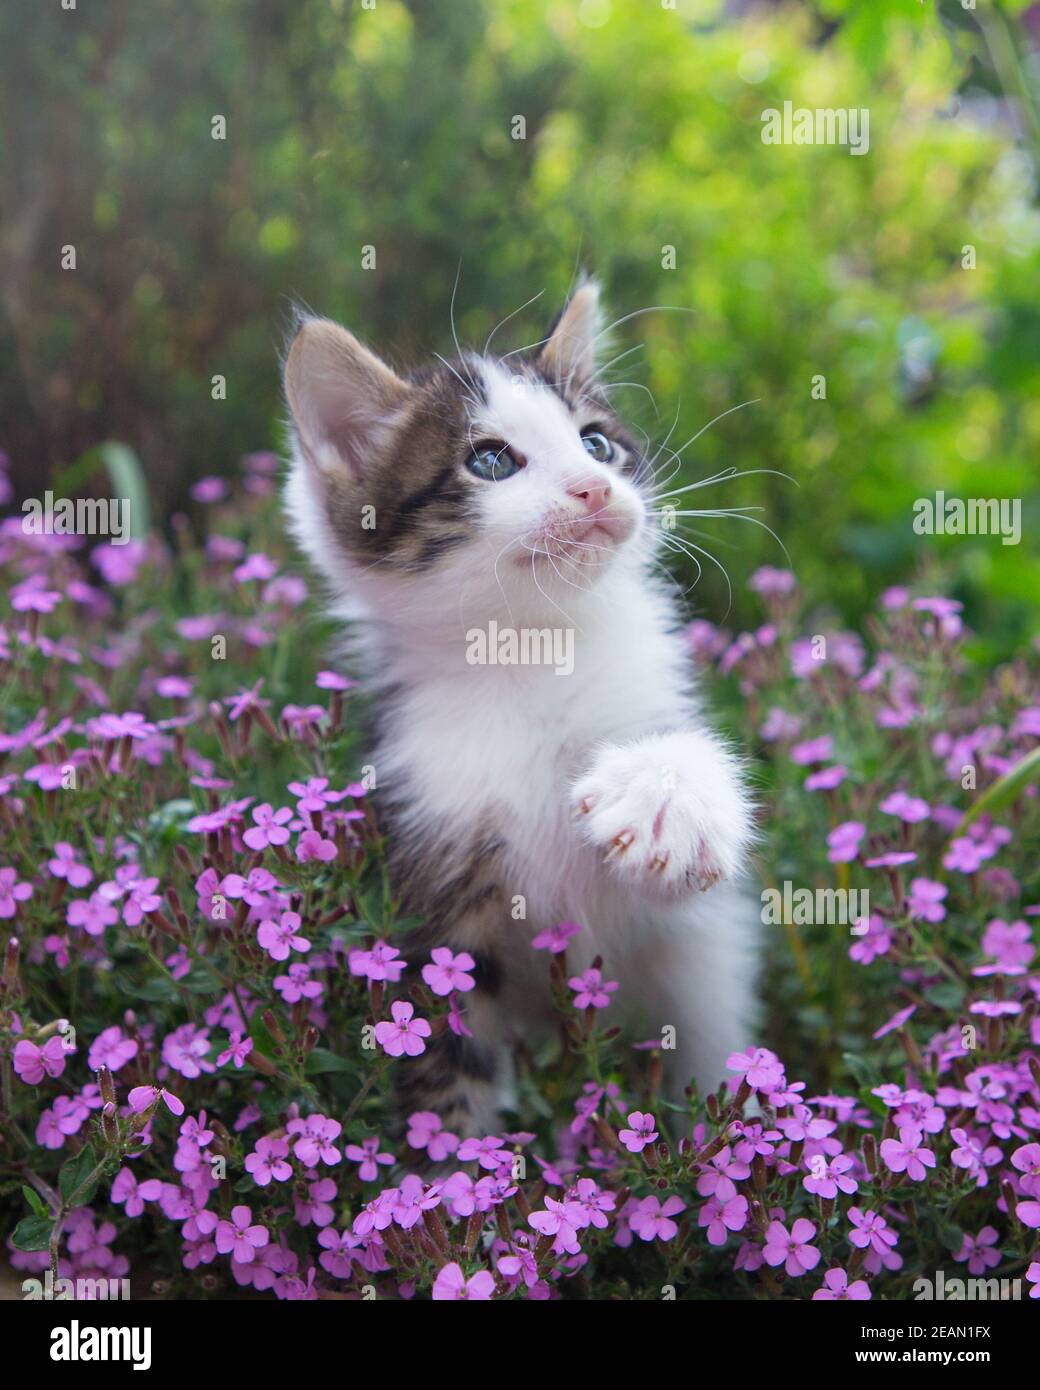 gray-white curious cute kitten with big blue eyes sits on a flower ...